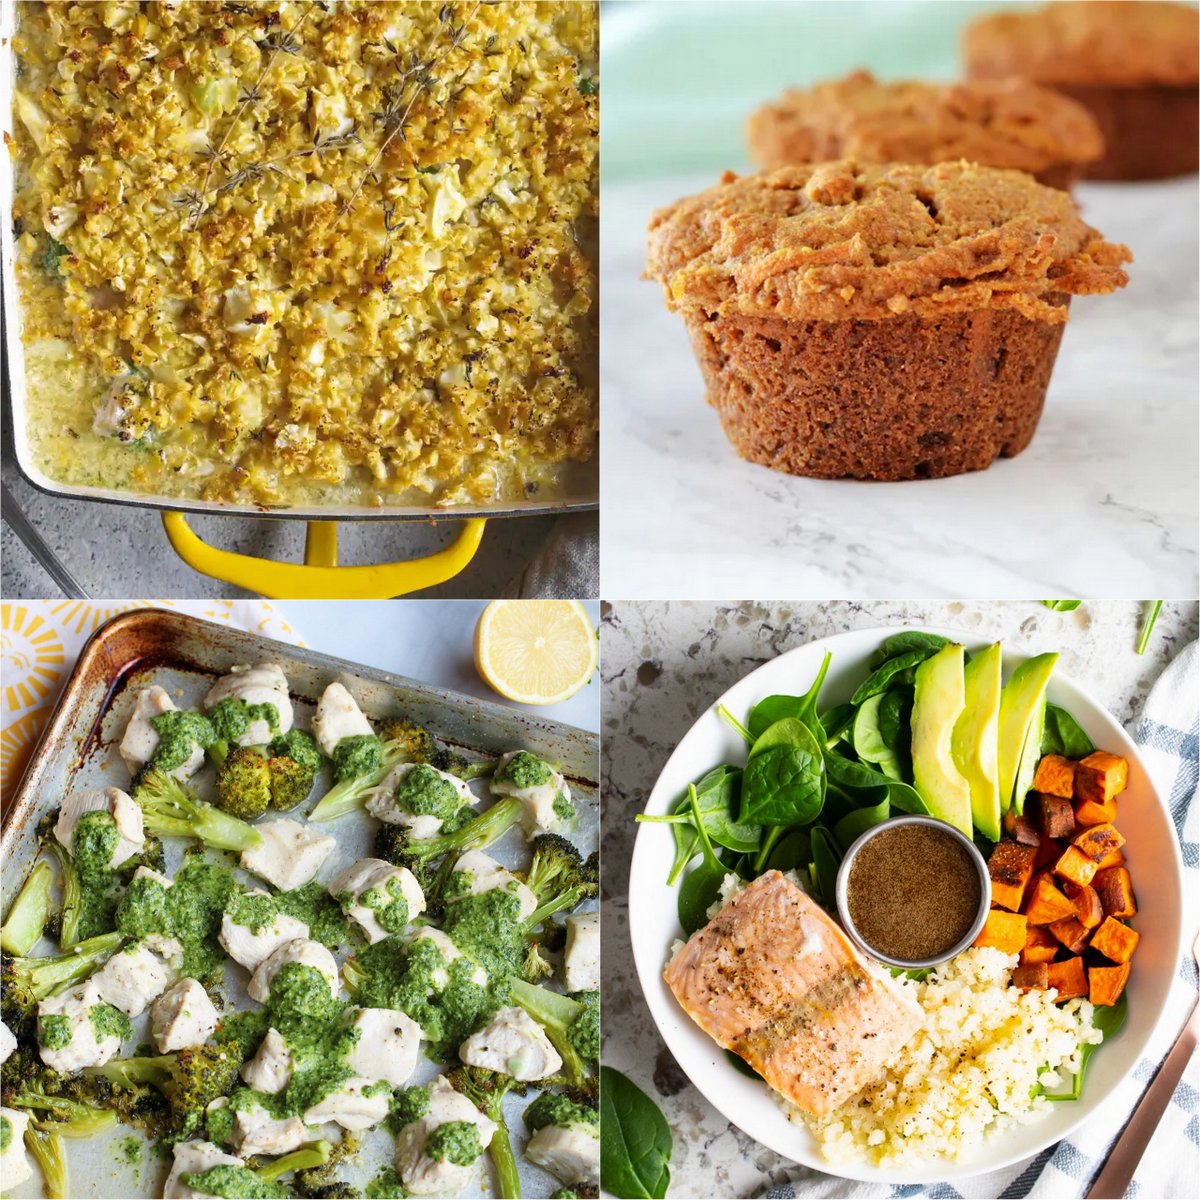 Paleo AIP Recipe Roundtable #404 | Phoenix Helix - *Featured Recipes: Seafood and Cauliflower Gratin, Carrot Muffins, Salmon Power Bowls, and Lemon Chicken Broccoli Sheet Pan Meal.